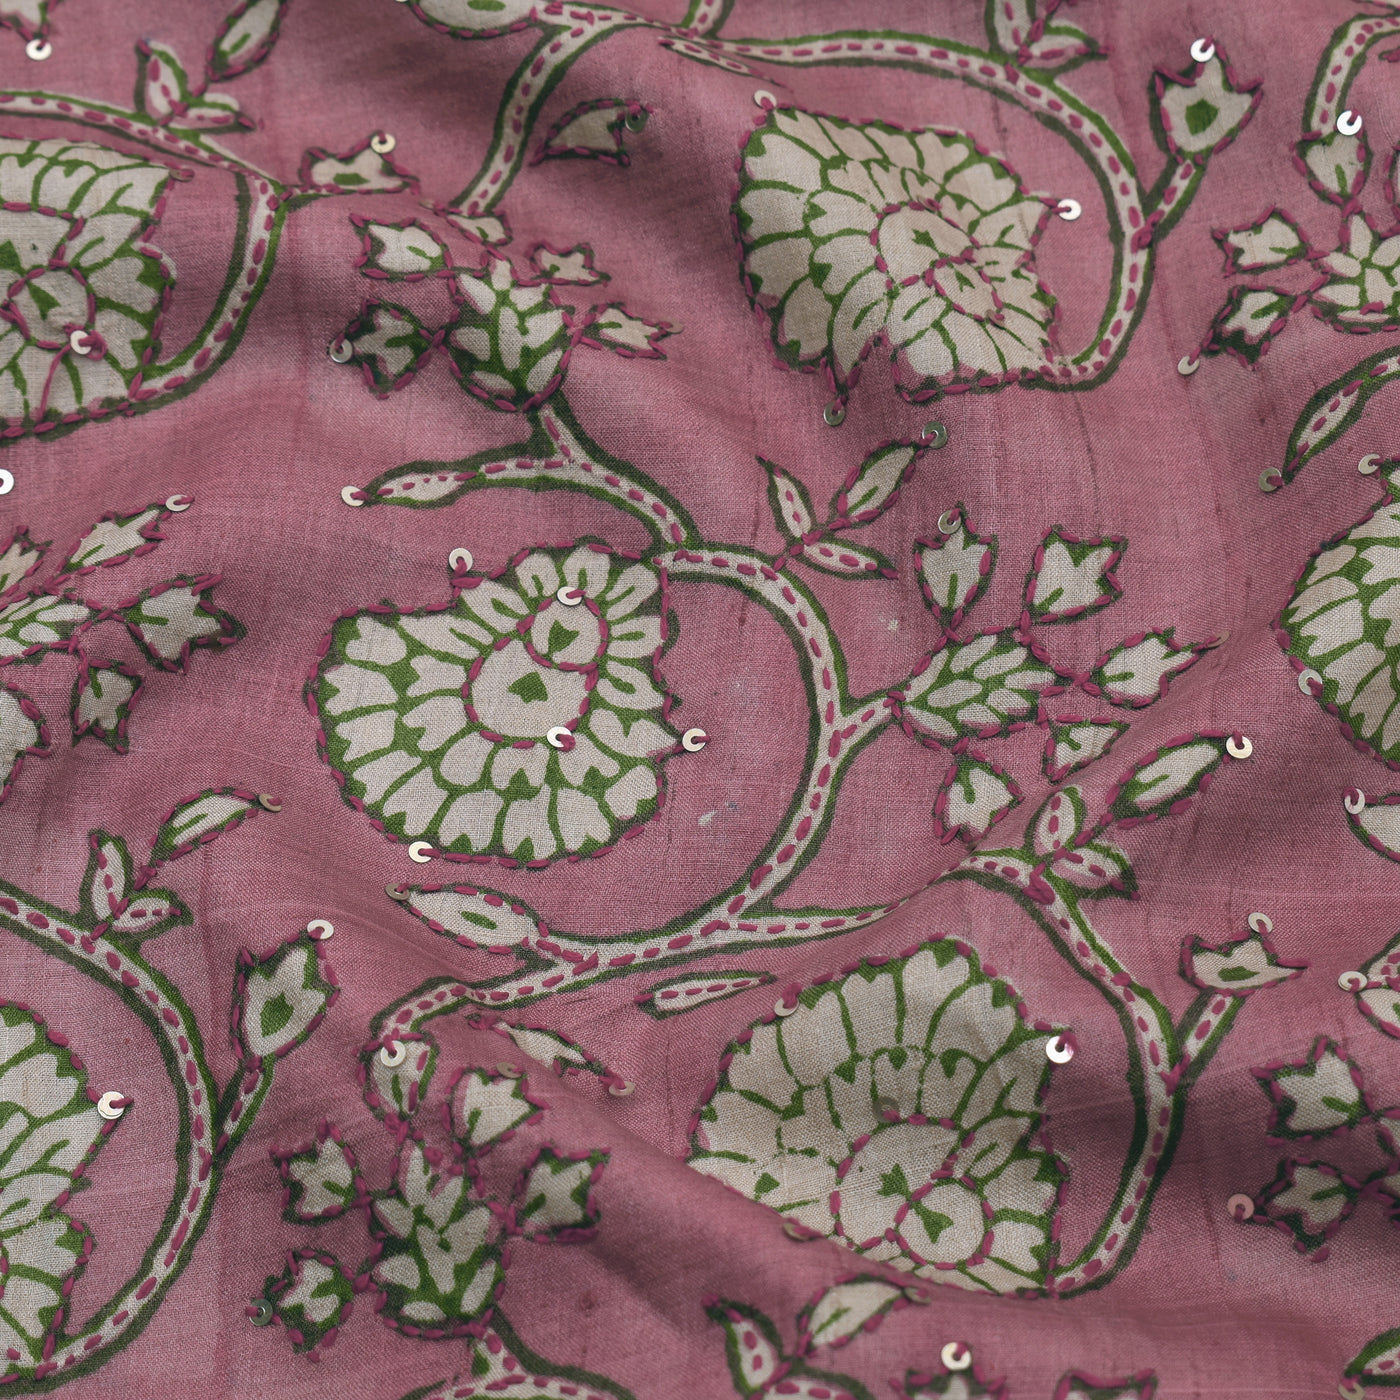 Onion Pink Tussar Fabric with Kantha Work Design